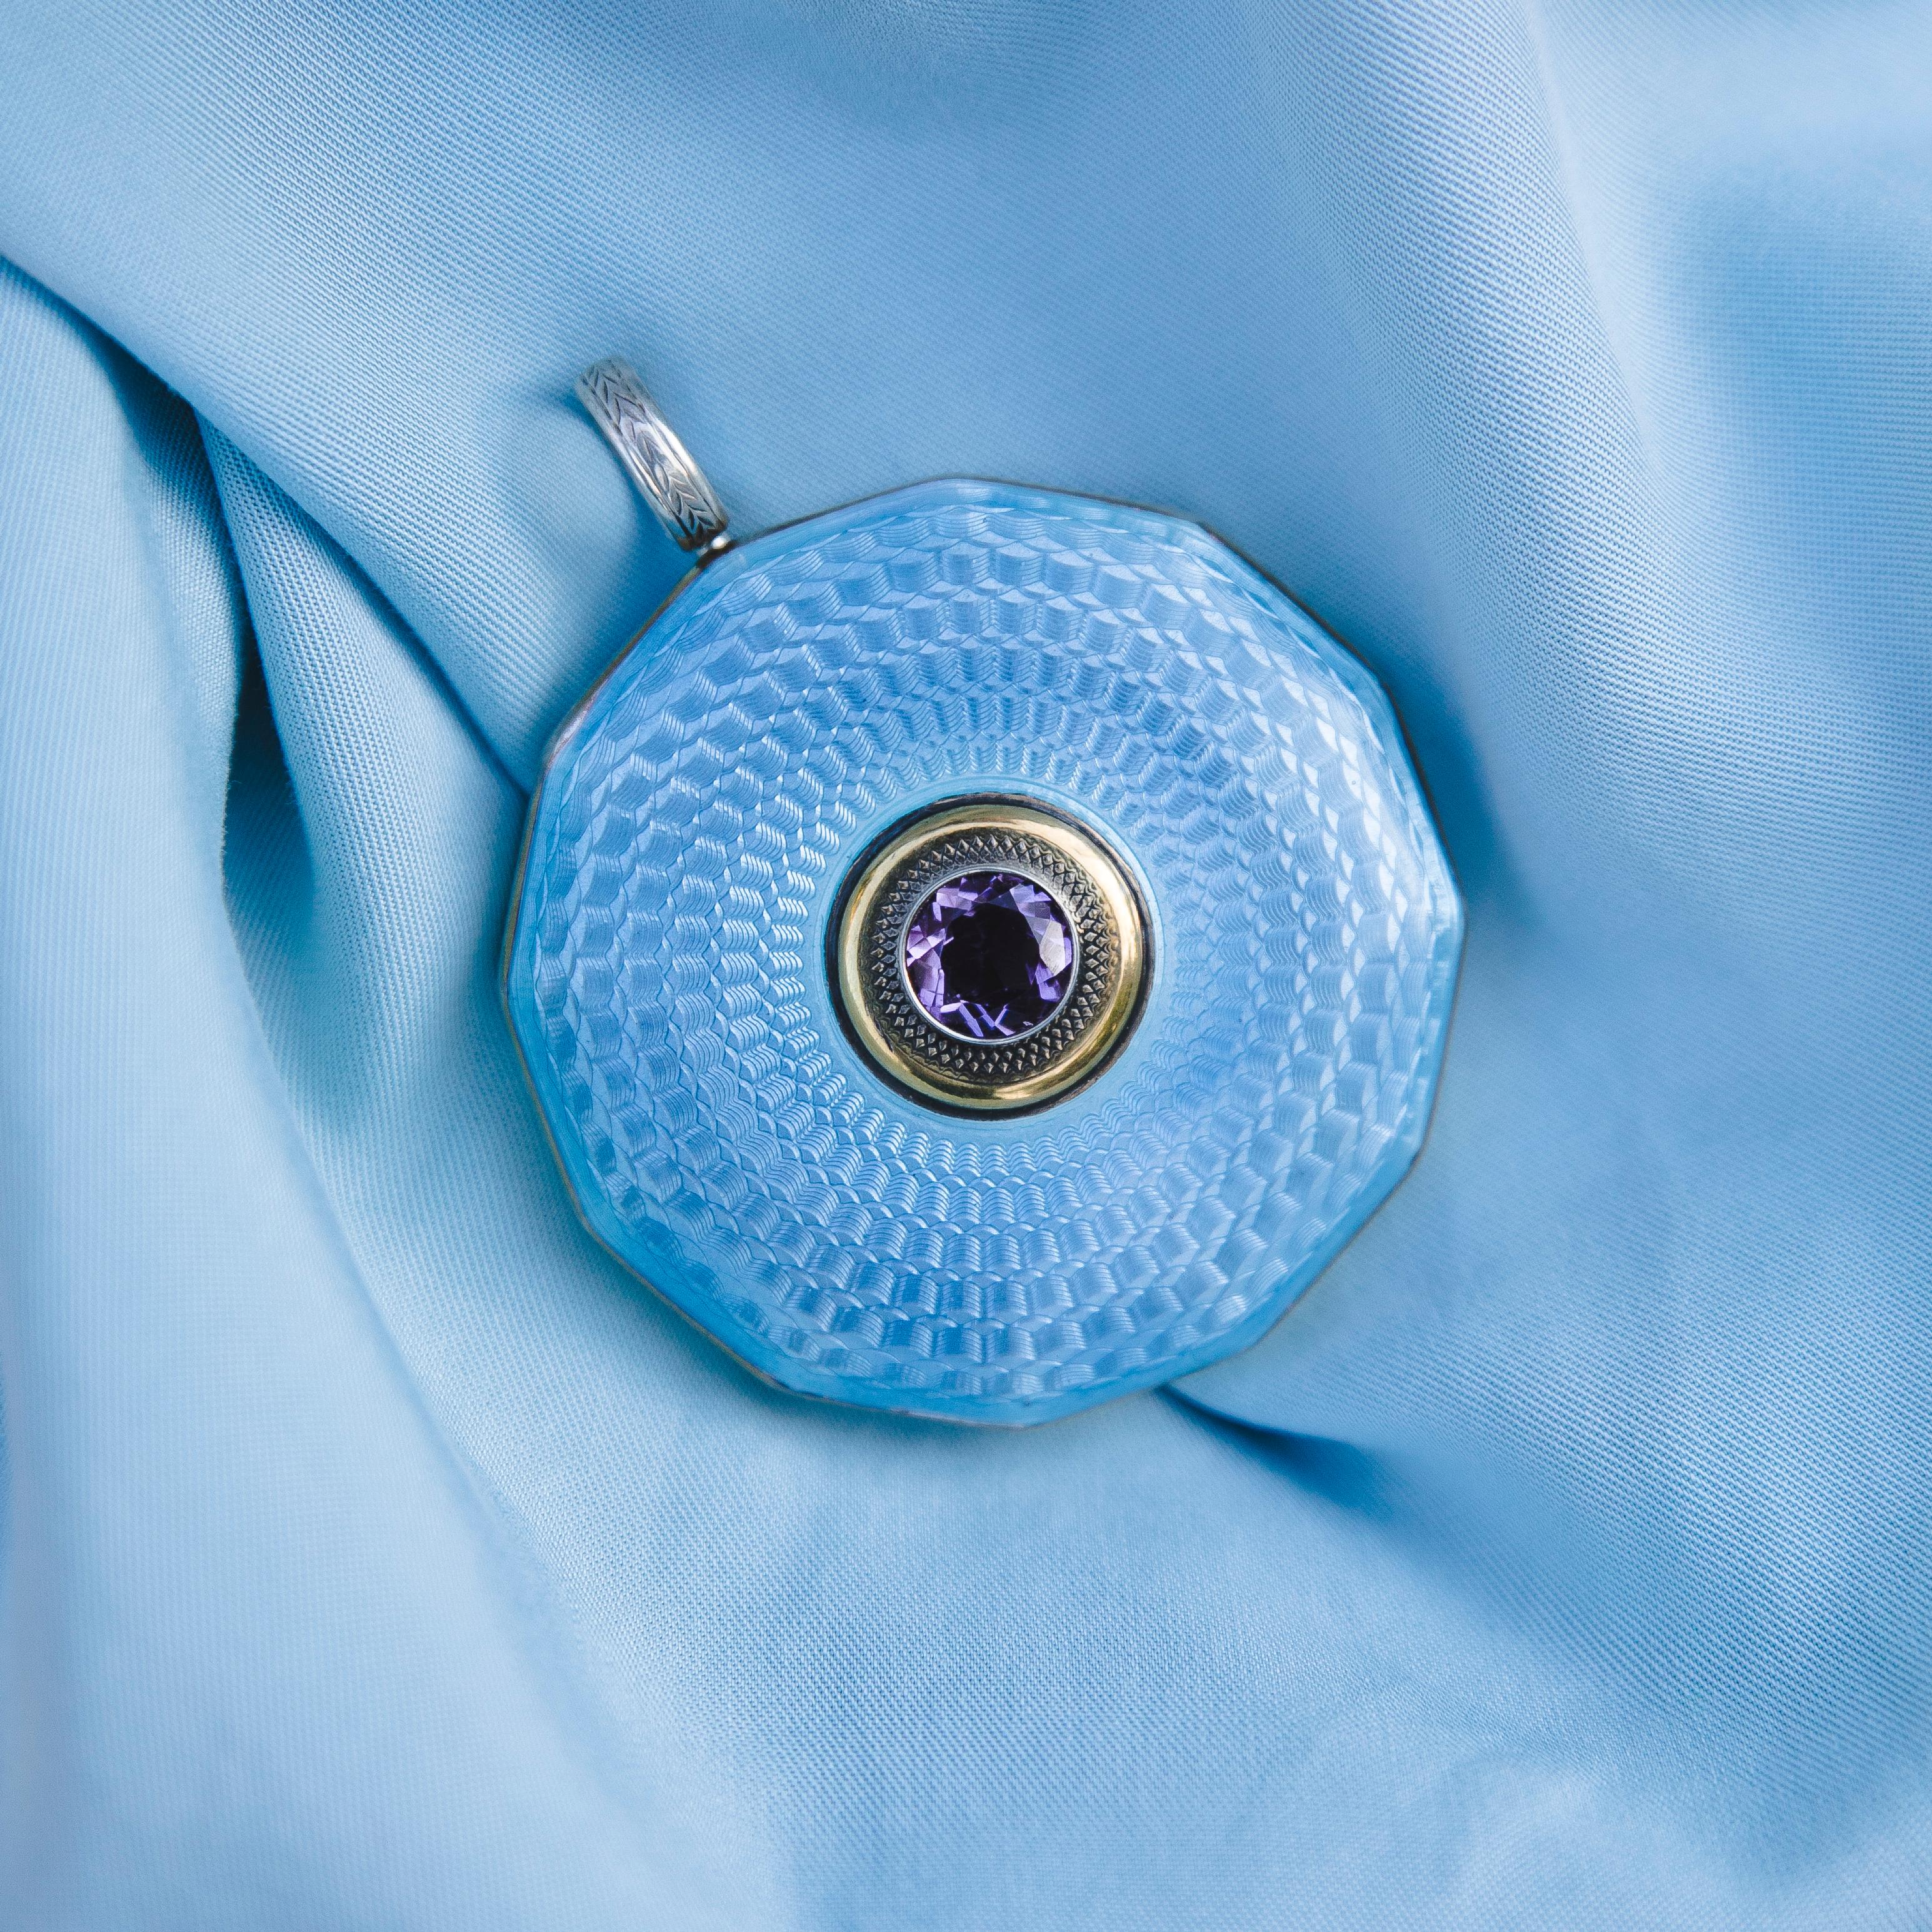 Huge antique pendant. Silver with Gold. A fine and unusual present!
Superb deep coloured Amethyst. 
The main feature of this massive pendant is the light blue enamel. 
19th century. Stamped 900 Silver. 

Very rare and outstanding item. It will be a